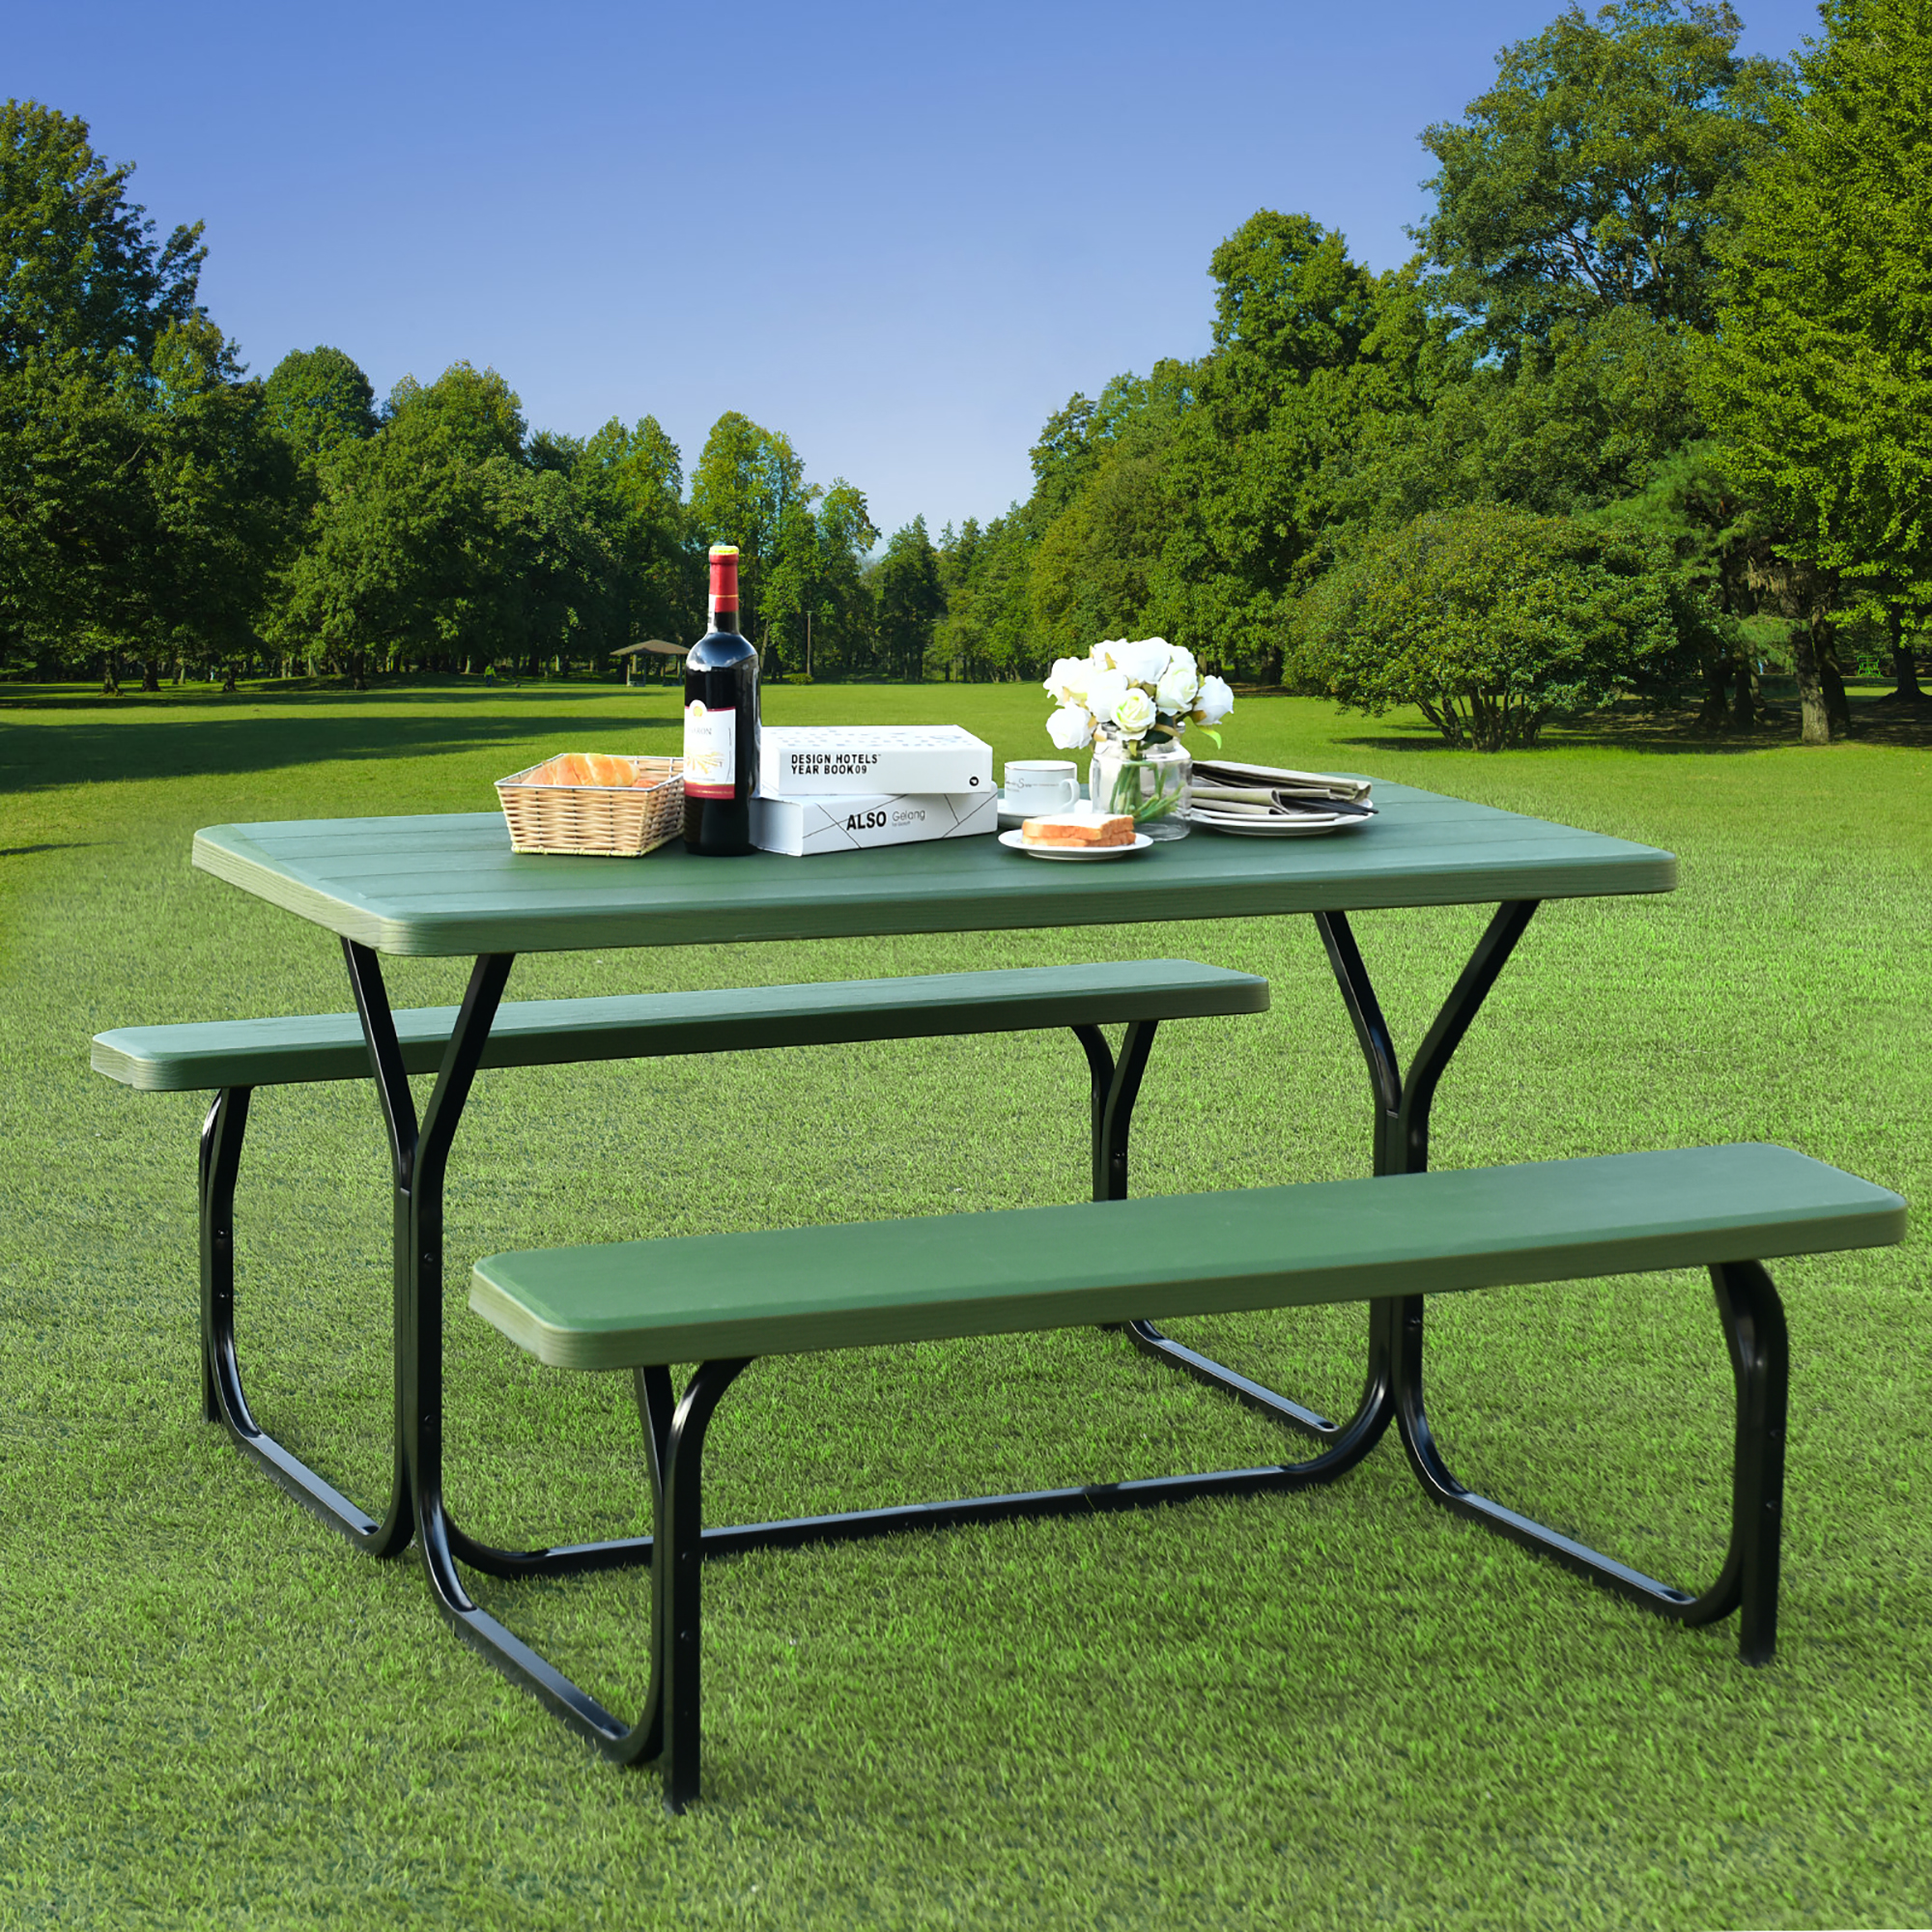 Costway Picnic Table Bench Set Outdoor Camping Backyard Garden Patio Party All Weather Gray/Green